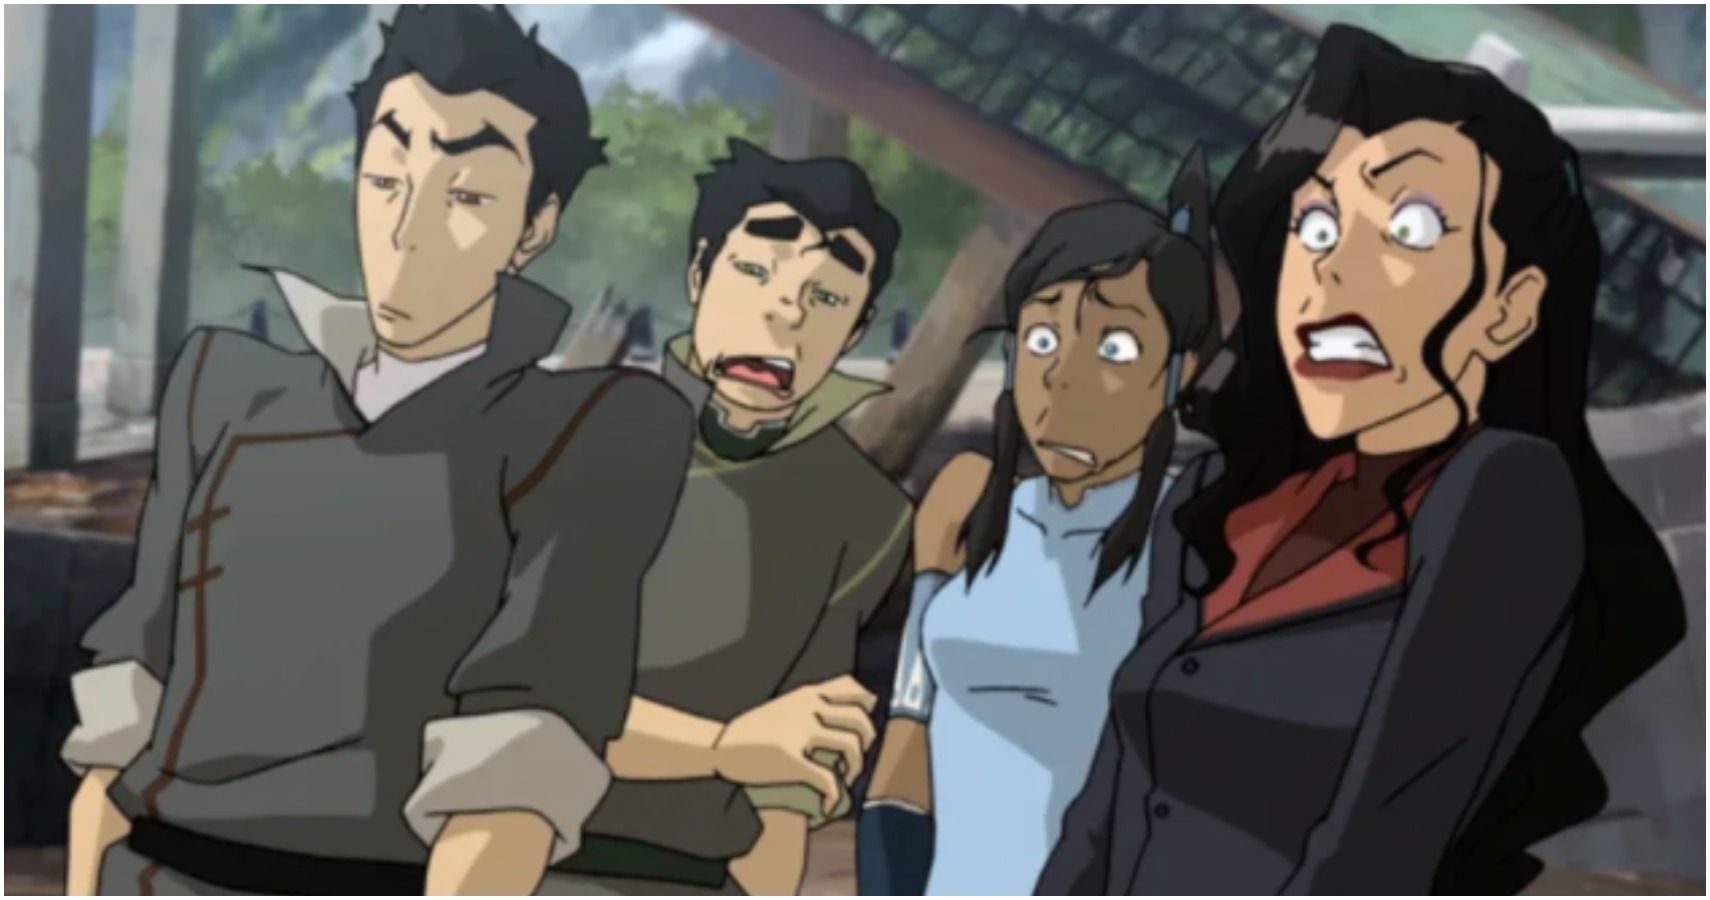 Date which you legend korra character would of Which Legend